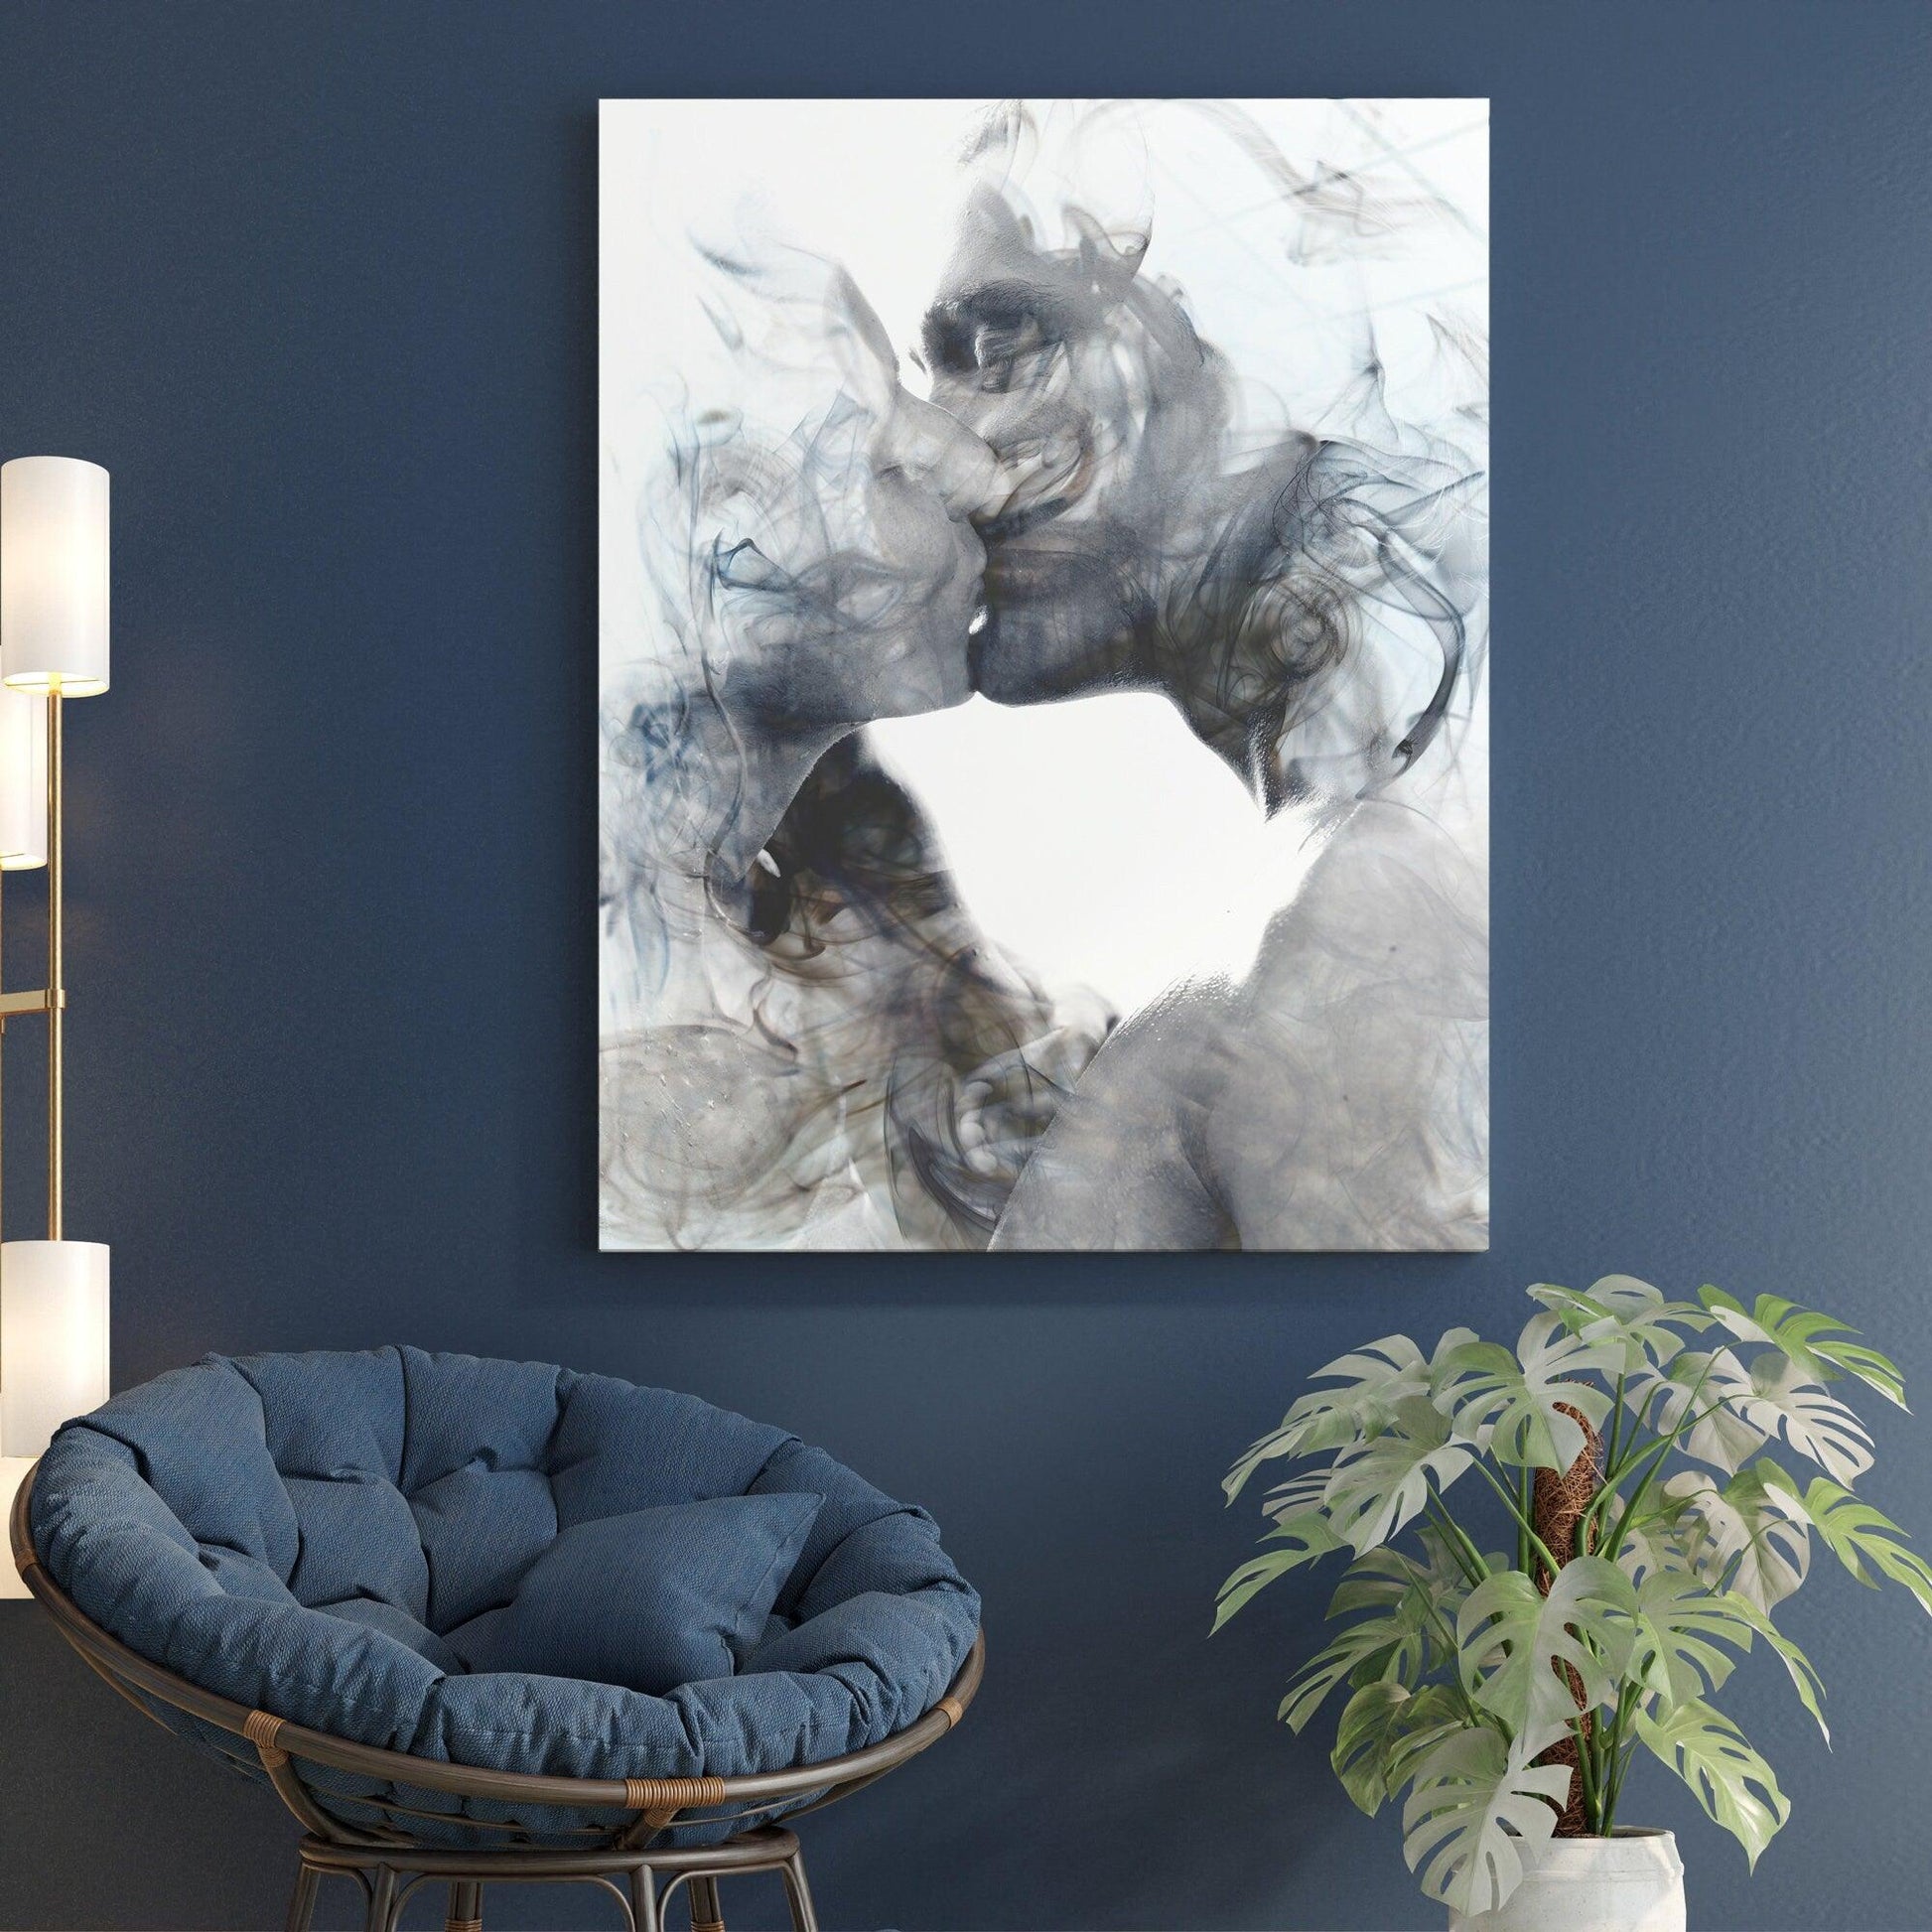 Abstract Couple Kissing canvas wall|  Romantic Kissing wall art, Smoke Effect, Love Portrait, love making Canvas Print, Home Decore